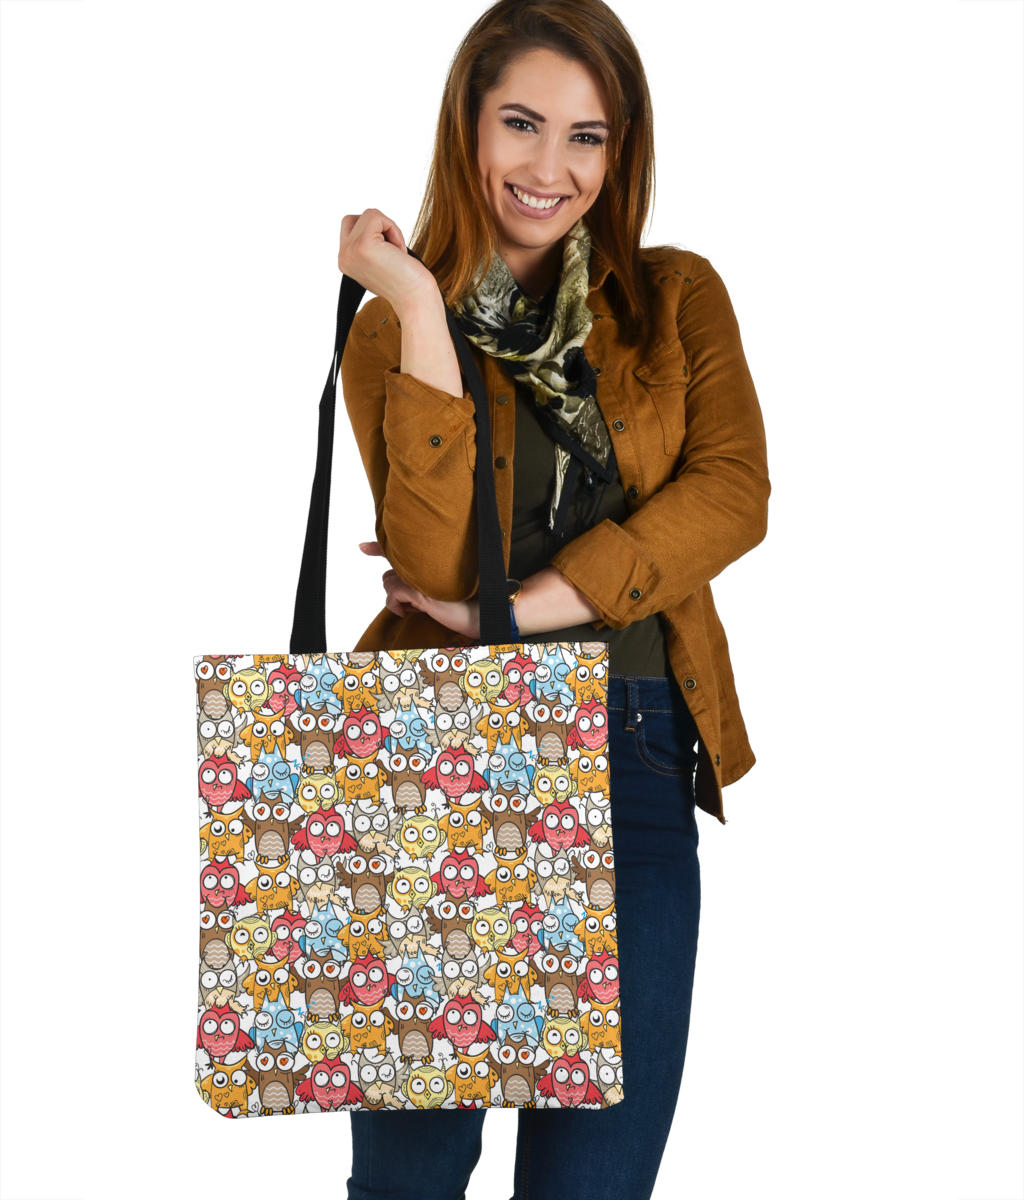 Silly Owl Pattern Cloth Tote Bag